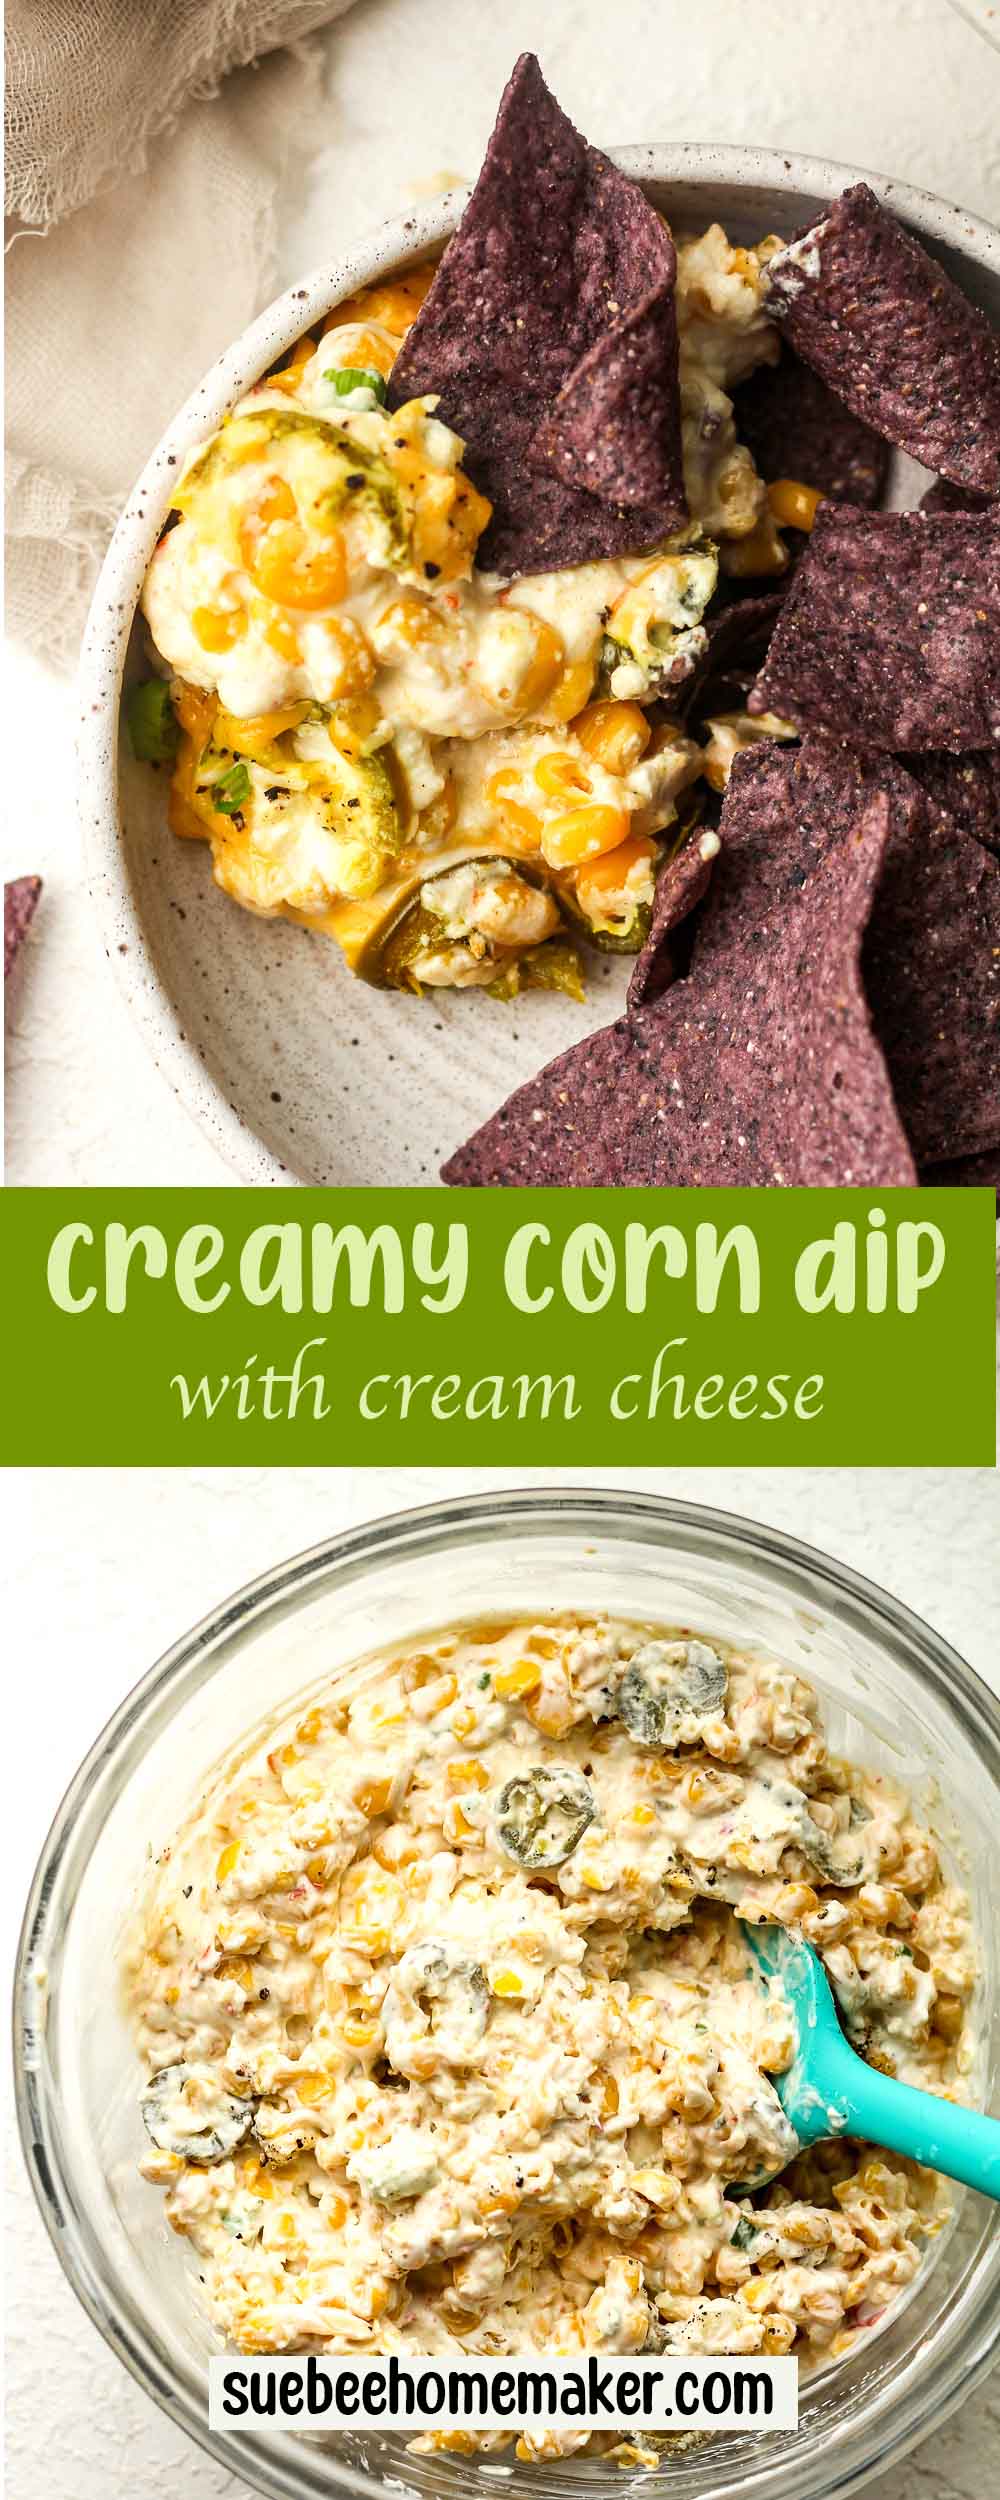 A collage of creamy corn dip with cream cheese.